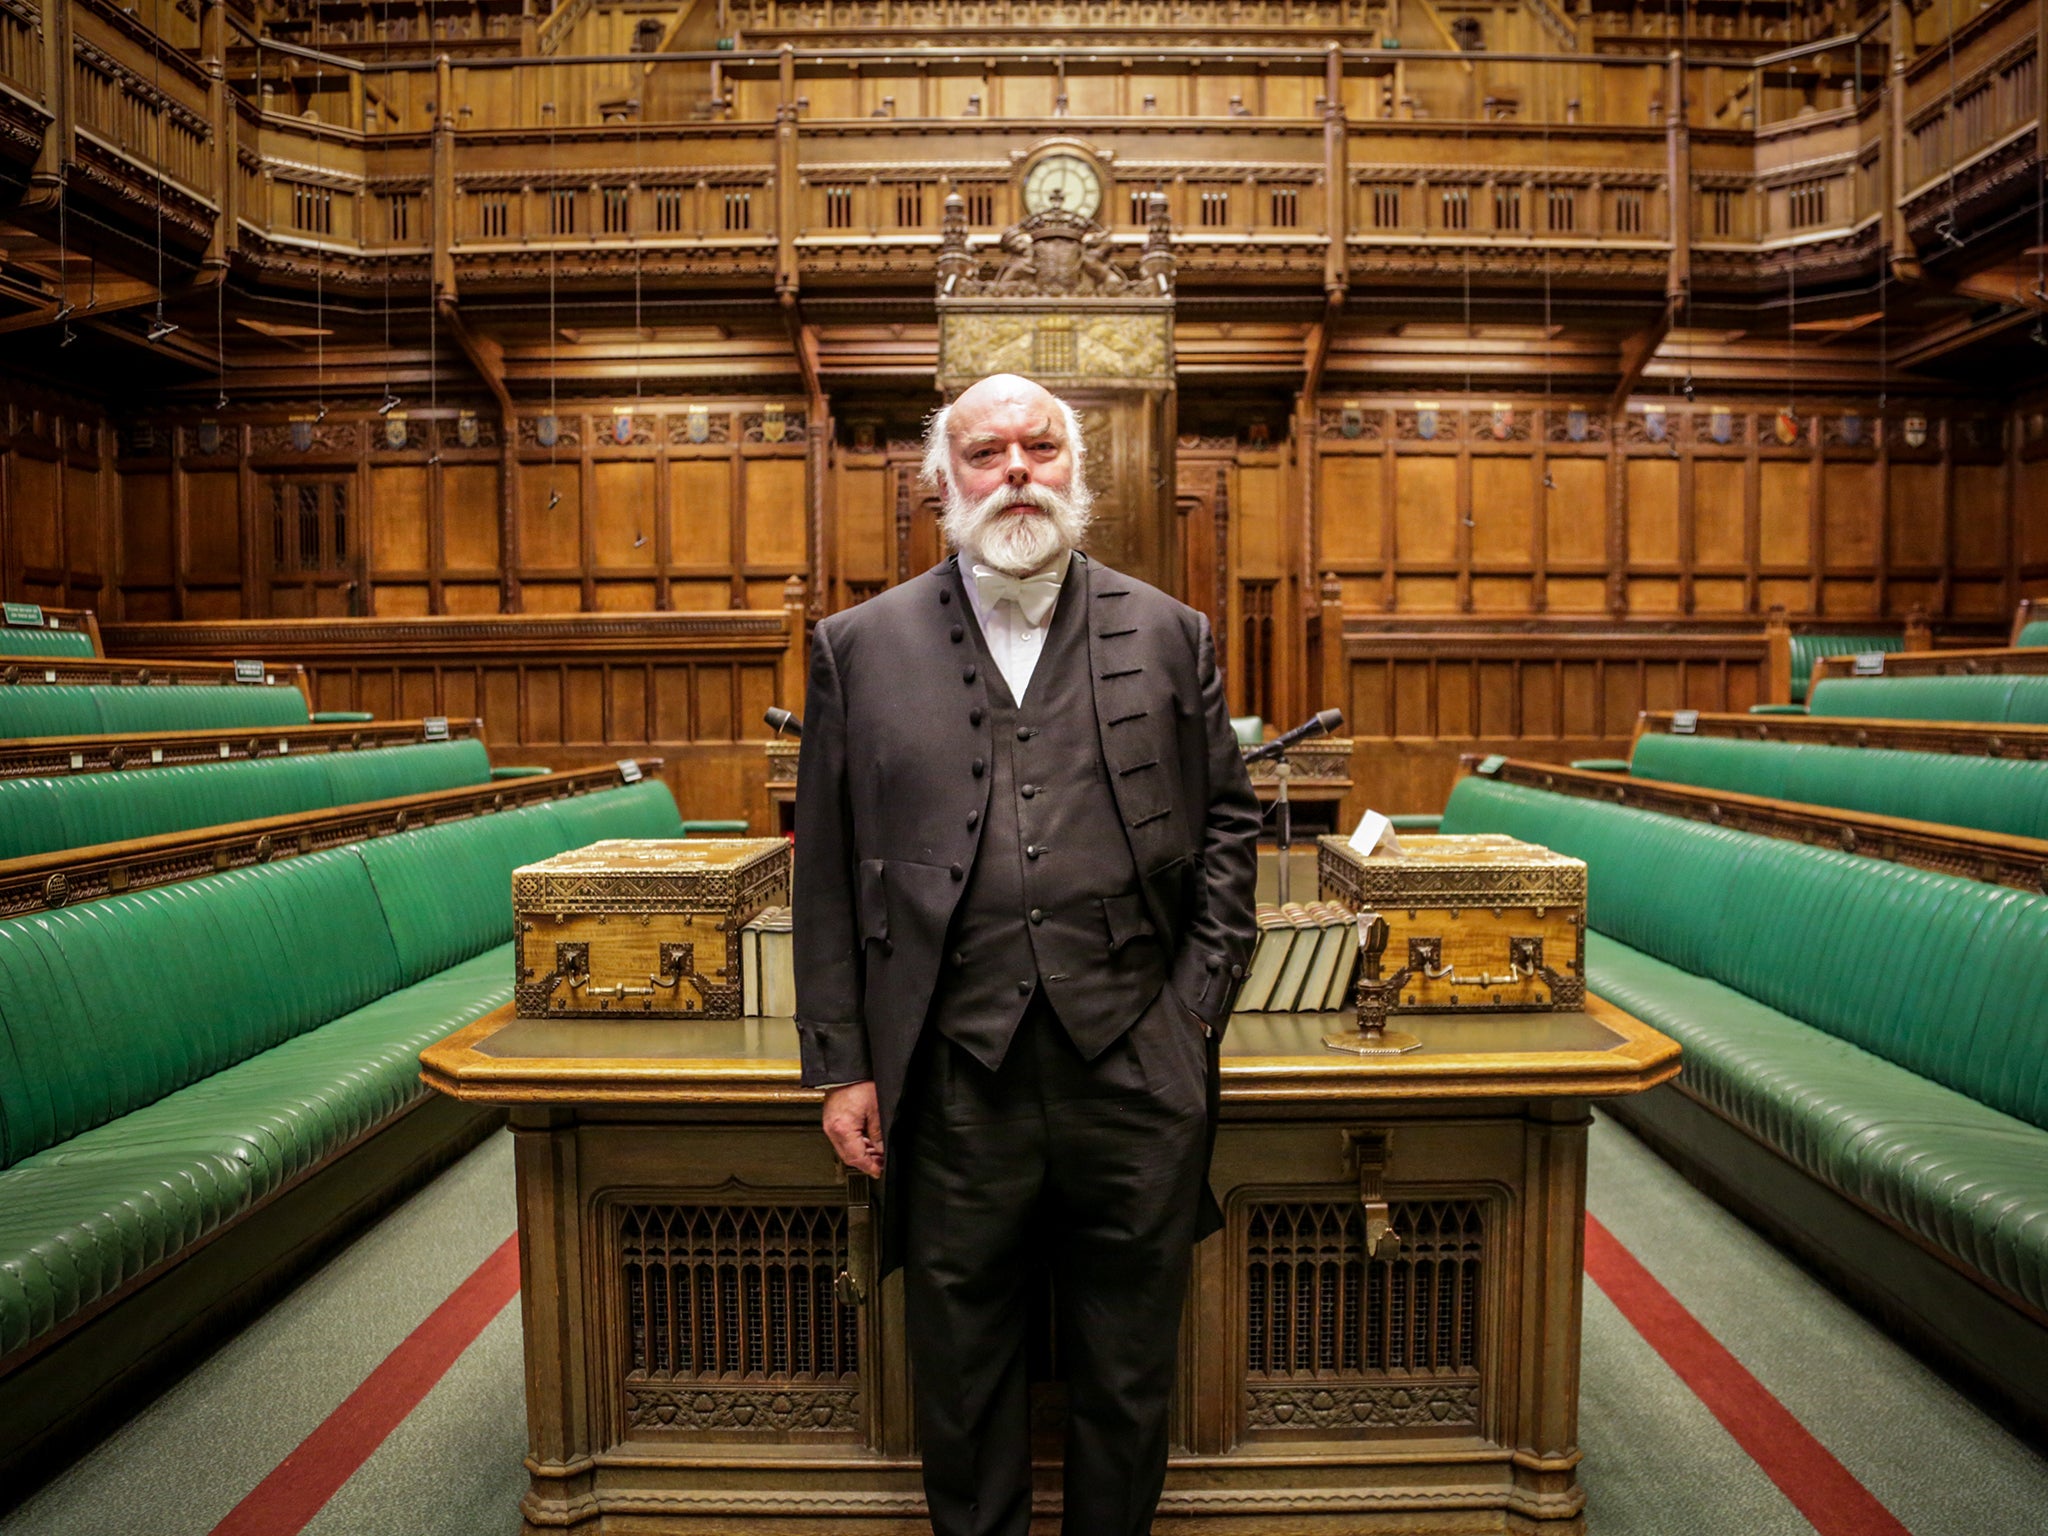 Principle Door Keeper of the House of Commons, Robin Fell